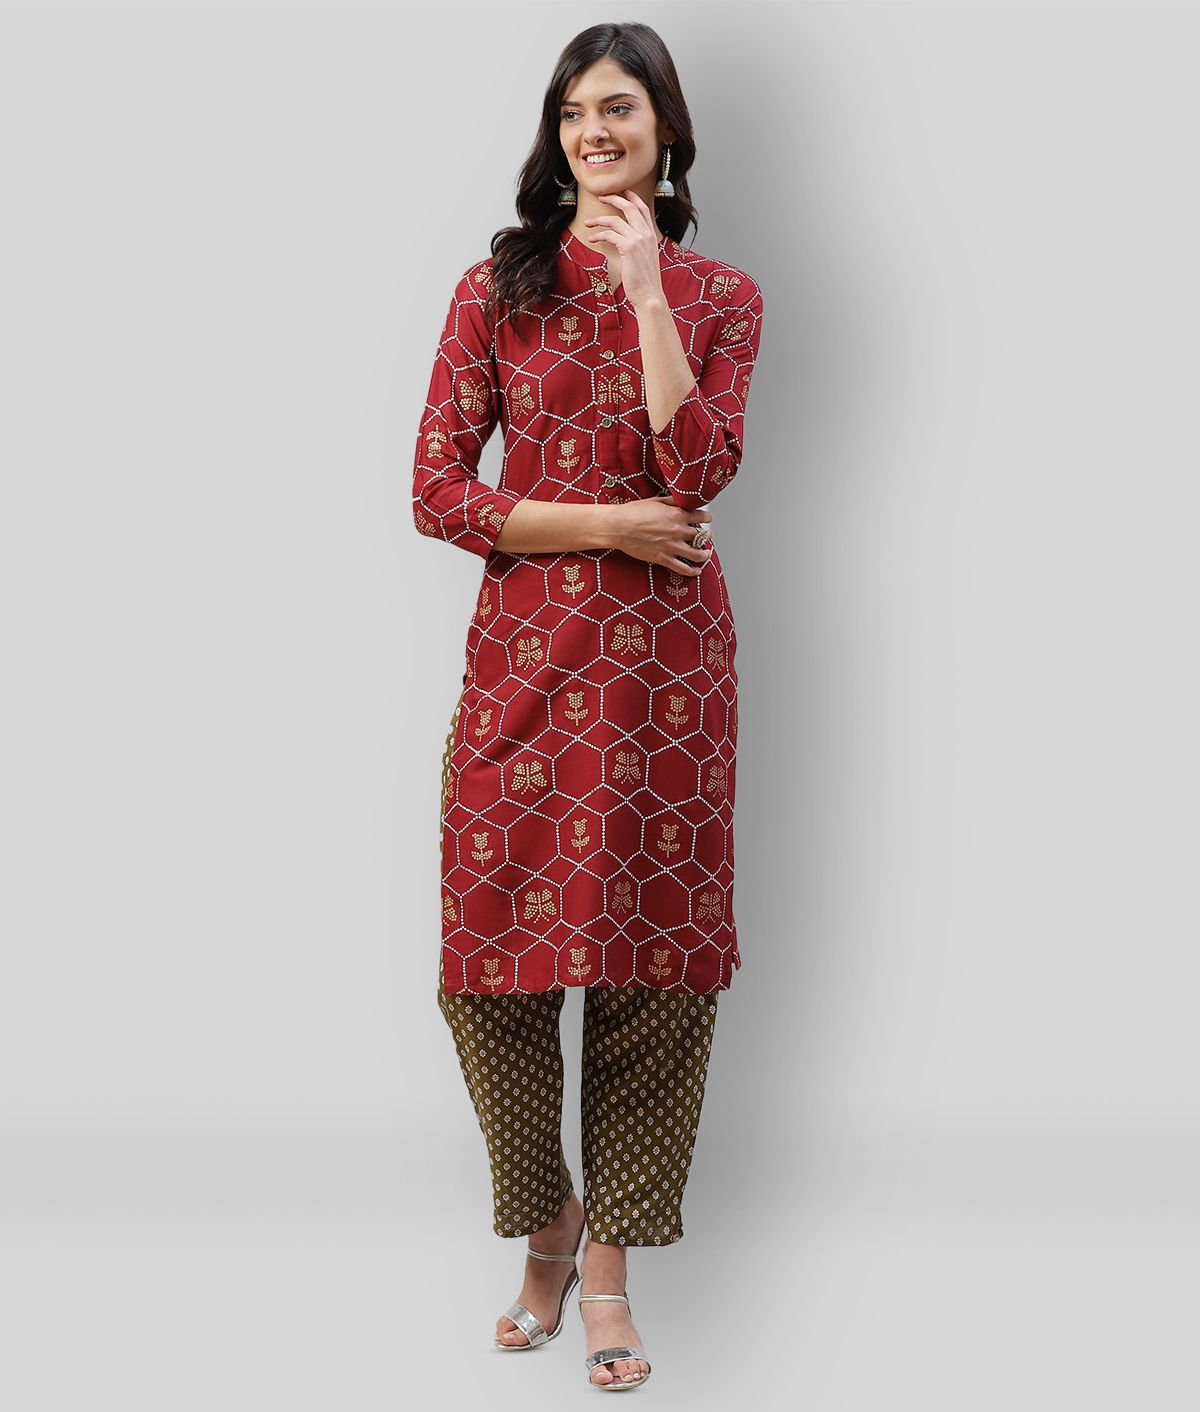     			JC4U - Maroon Straight Rayon Women's Stitched Salwar Suit ( Pack of 1 )